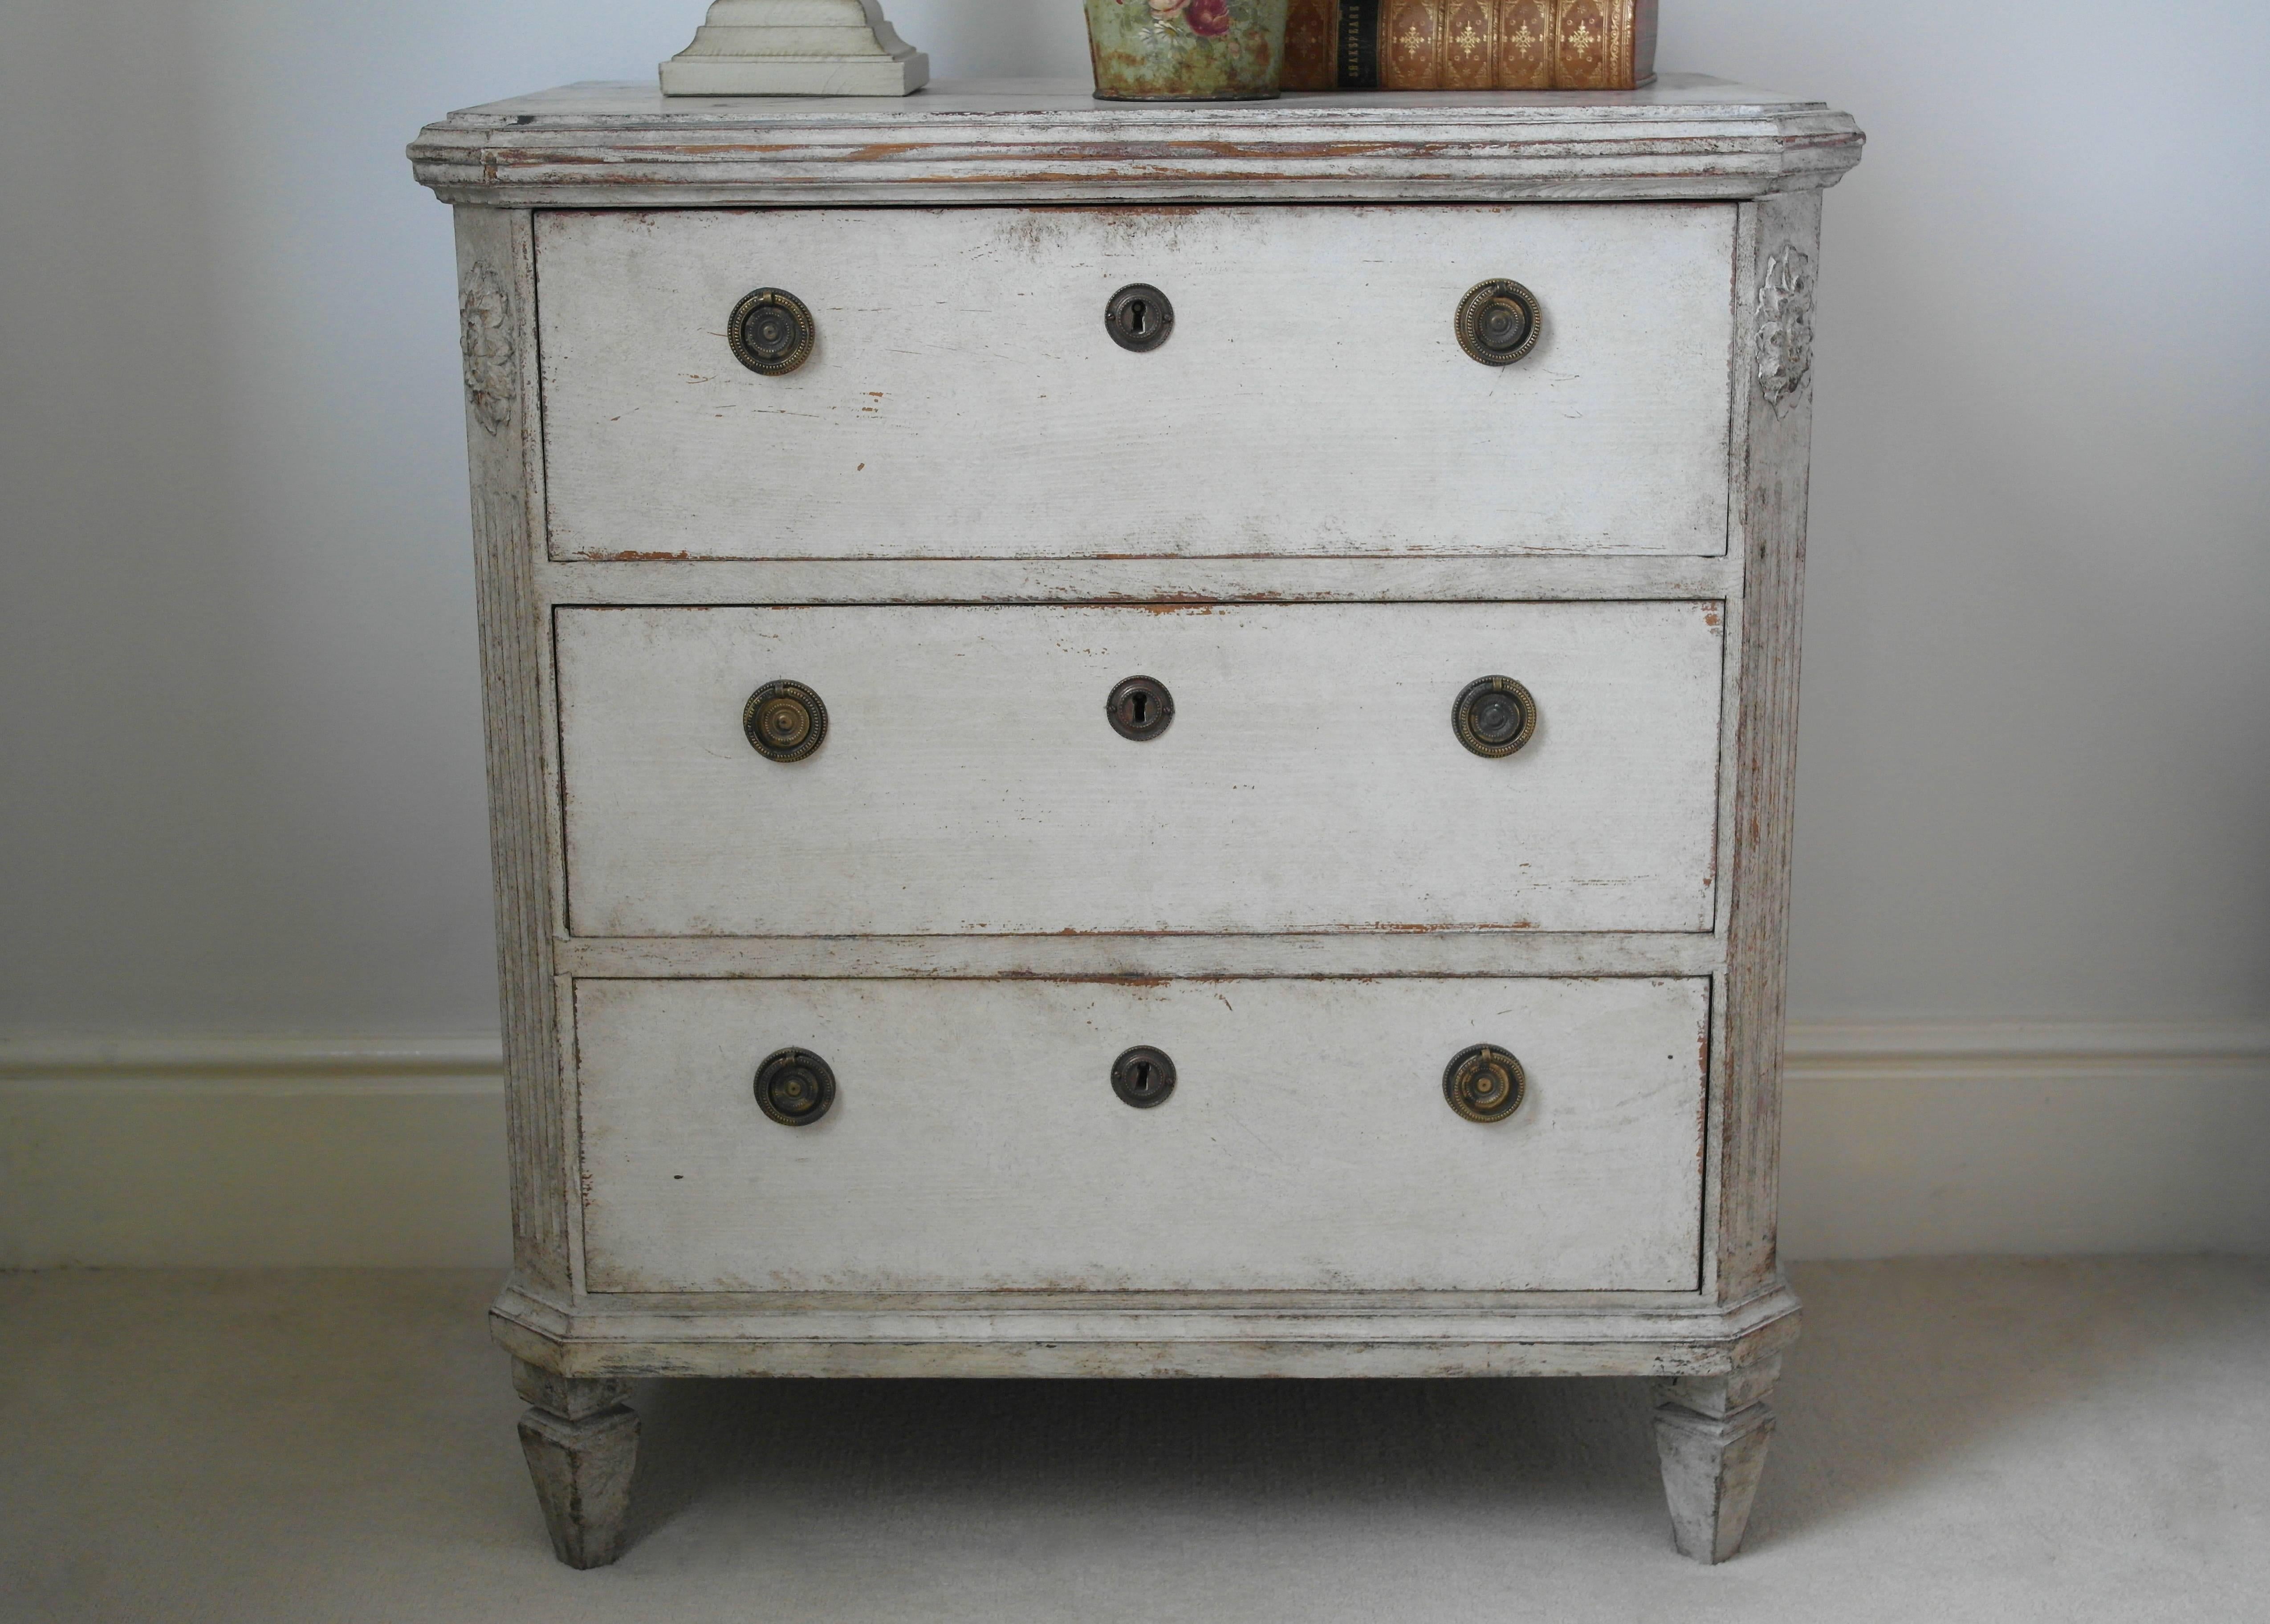 Pair of Swedish Painted Gustavian Style Chests In Excellent Condition For Sale In Warminster, Wiltshire